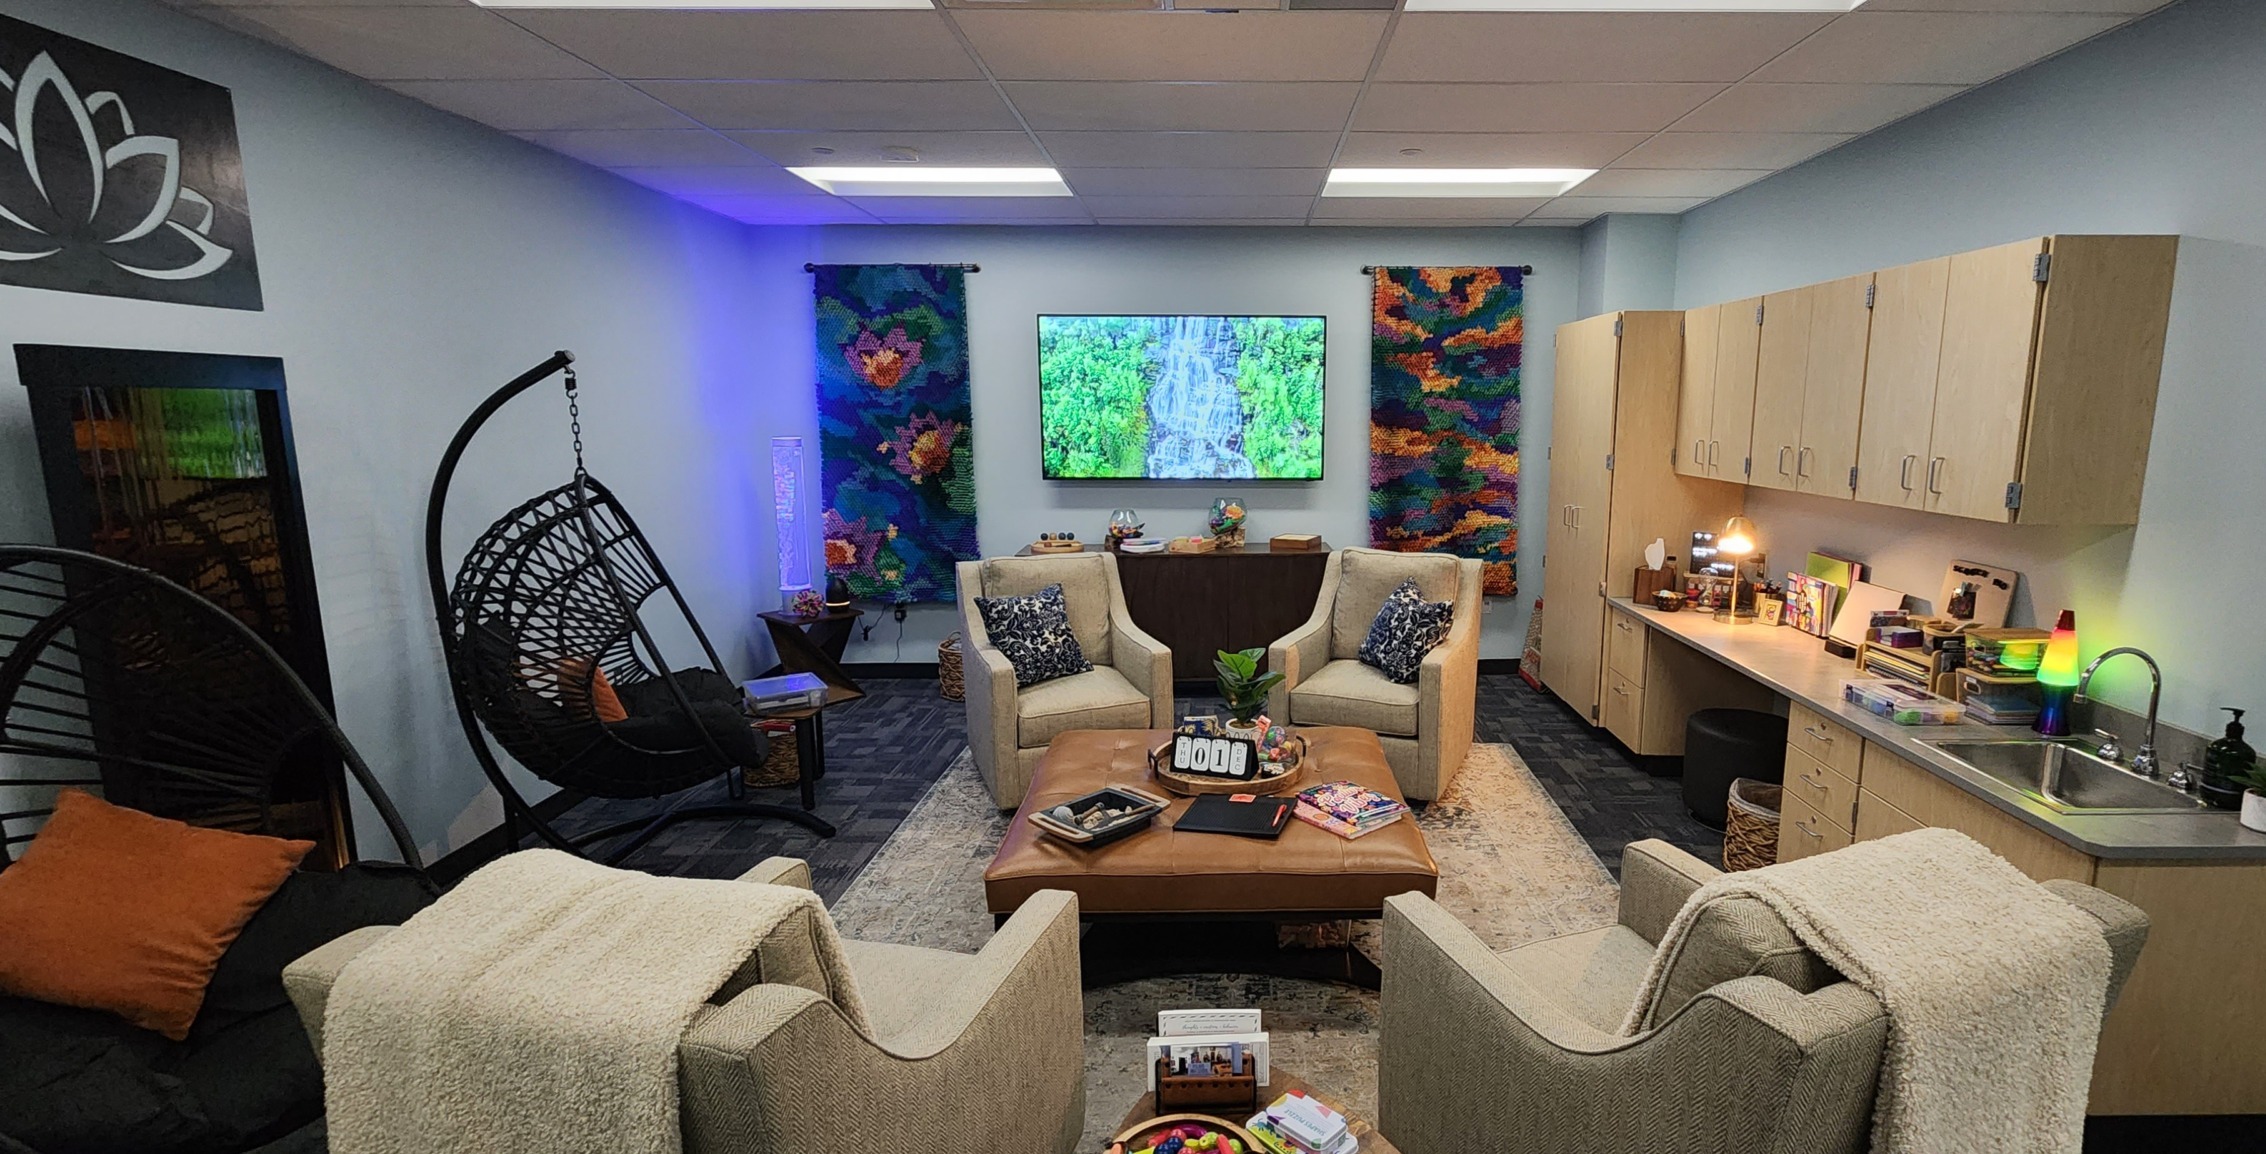 Stydent Wellness Center: A room furnshed like a cozy licing room with four overstuffed chairs around a large coffee table, a large screen TV, and colorful, large tactile art on the wall.